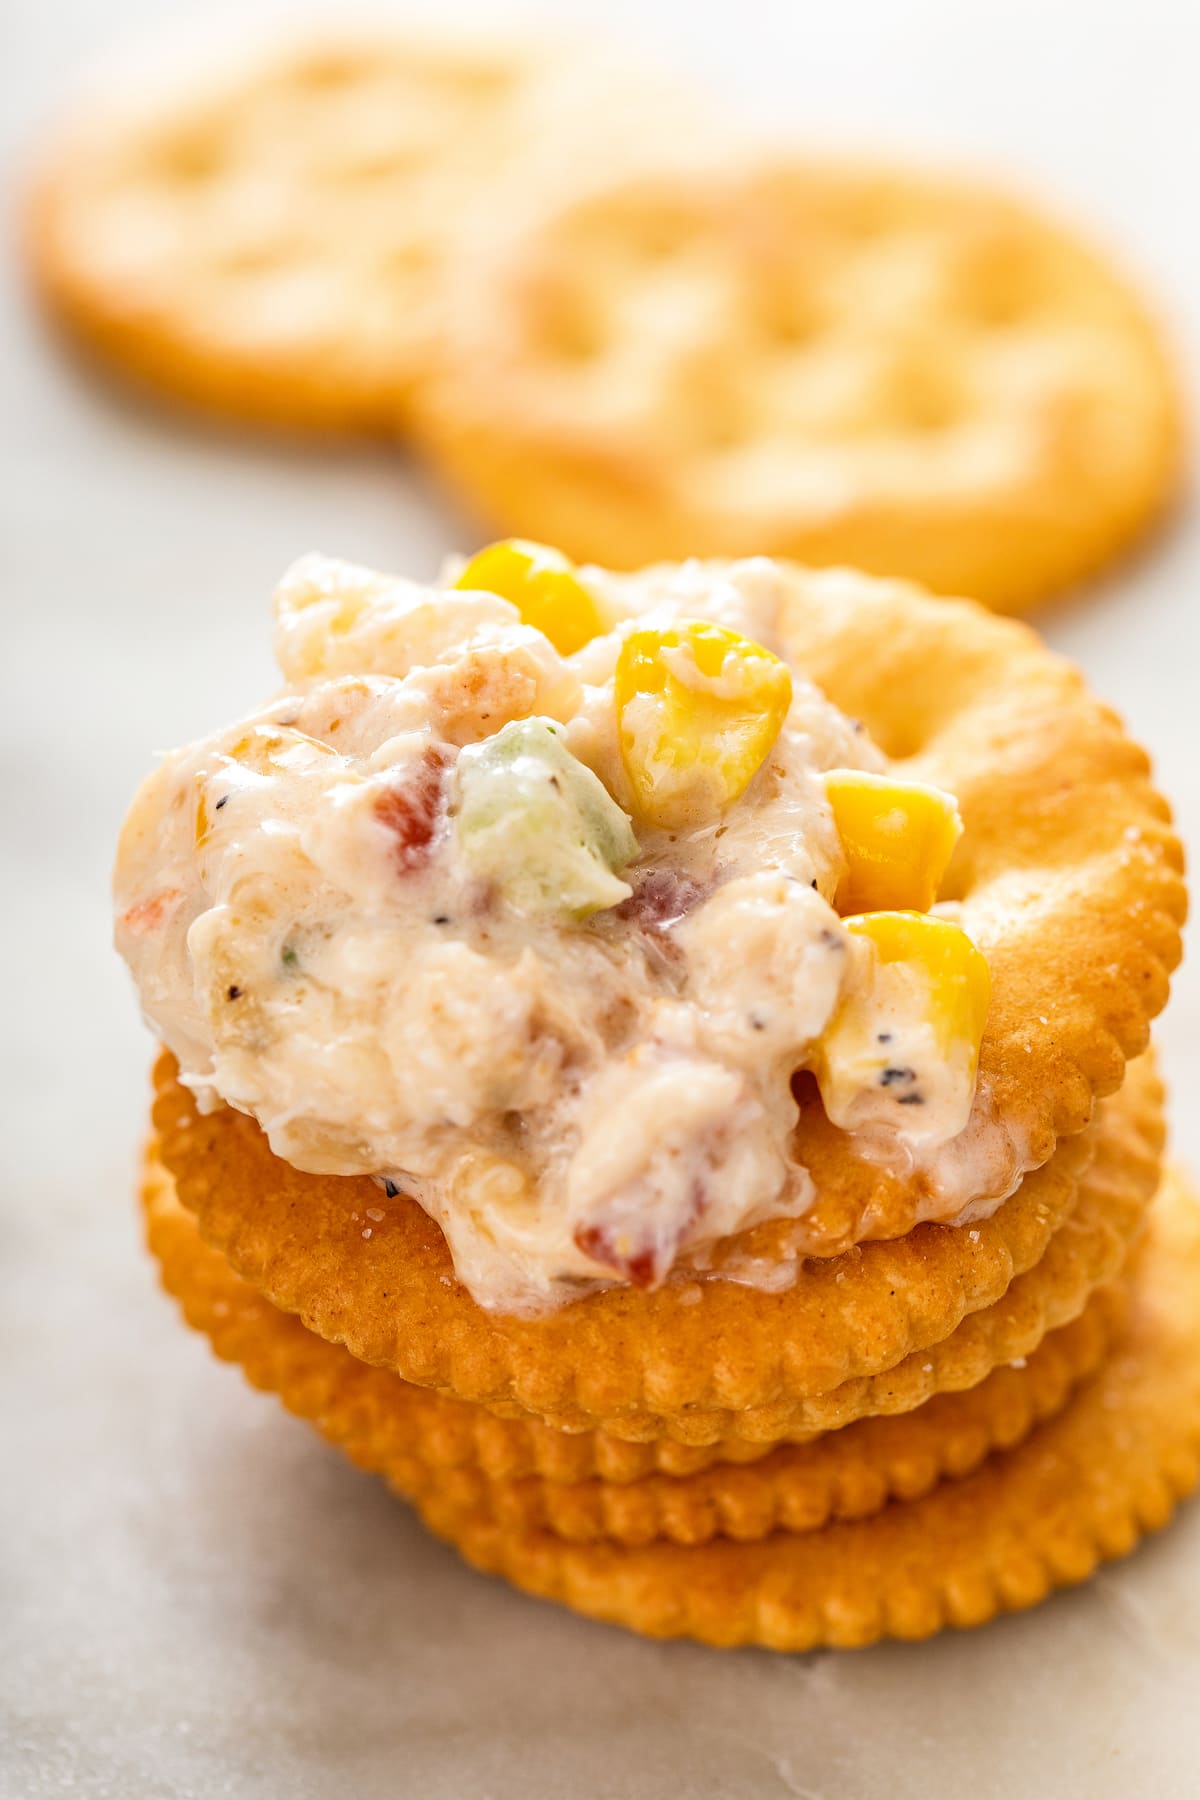 A stack of Ritz crackers with hot crab dip on top, with more crackers in the background.